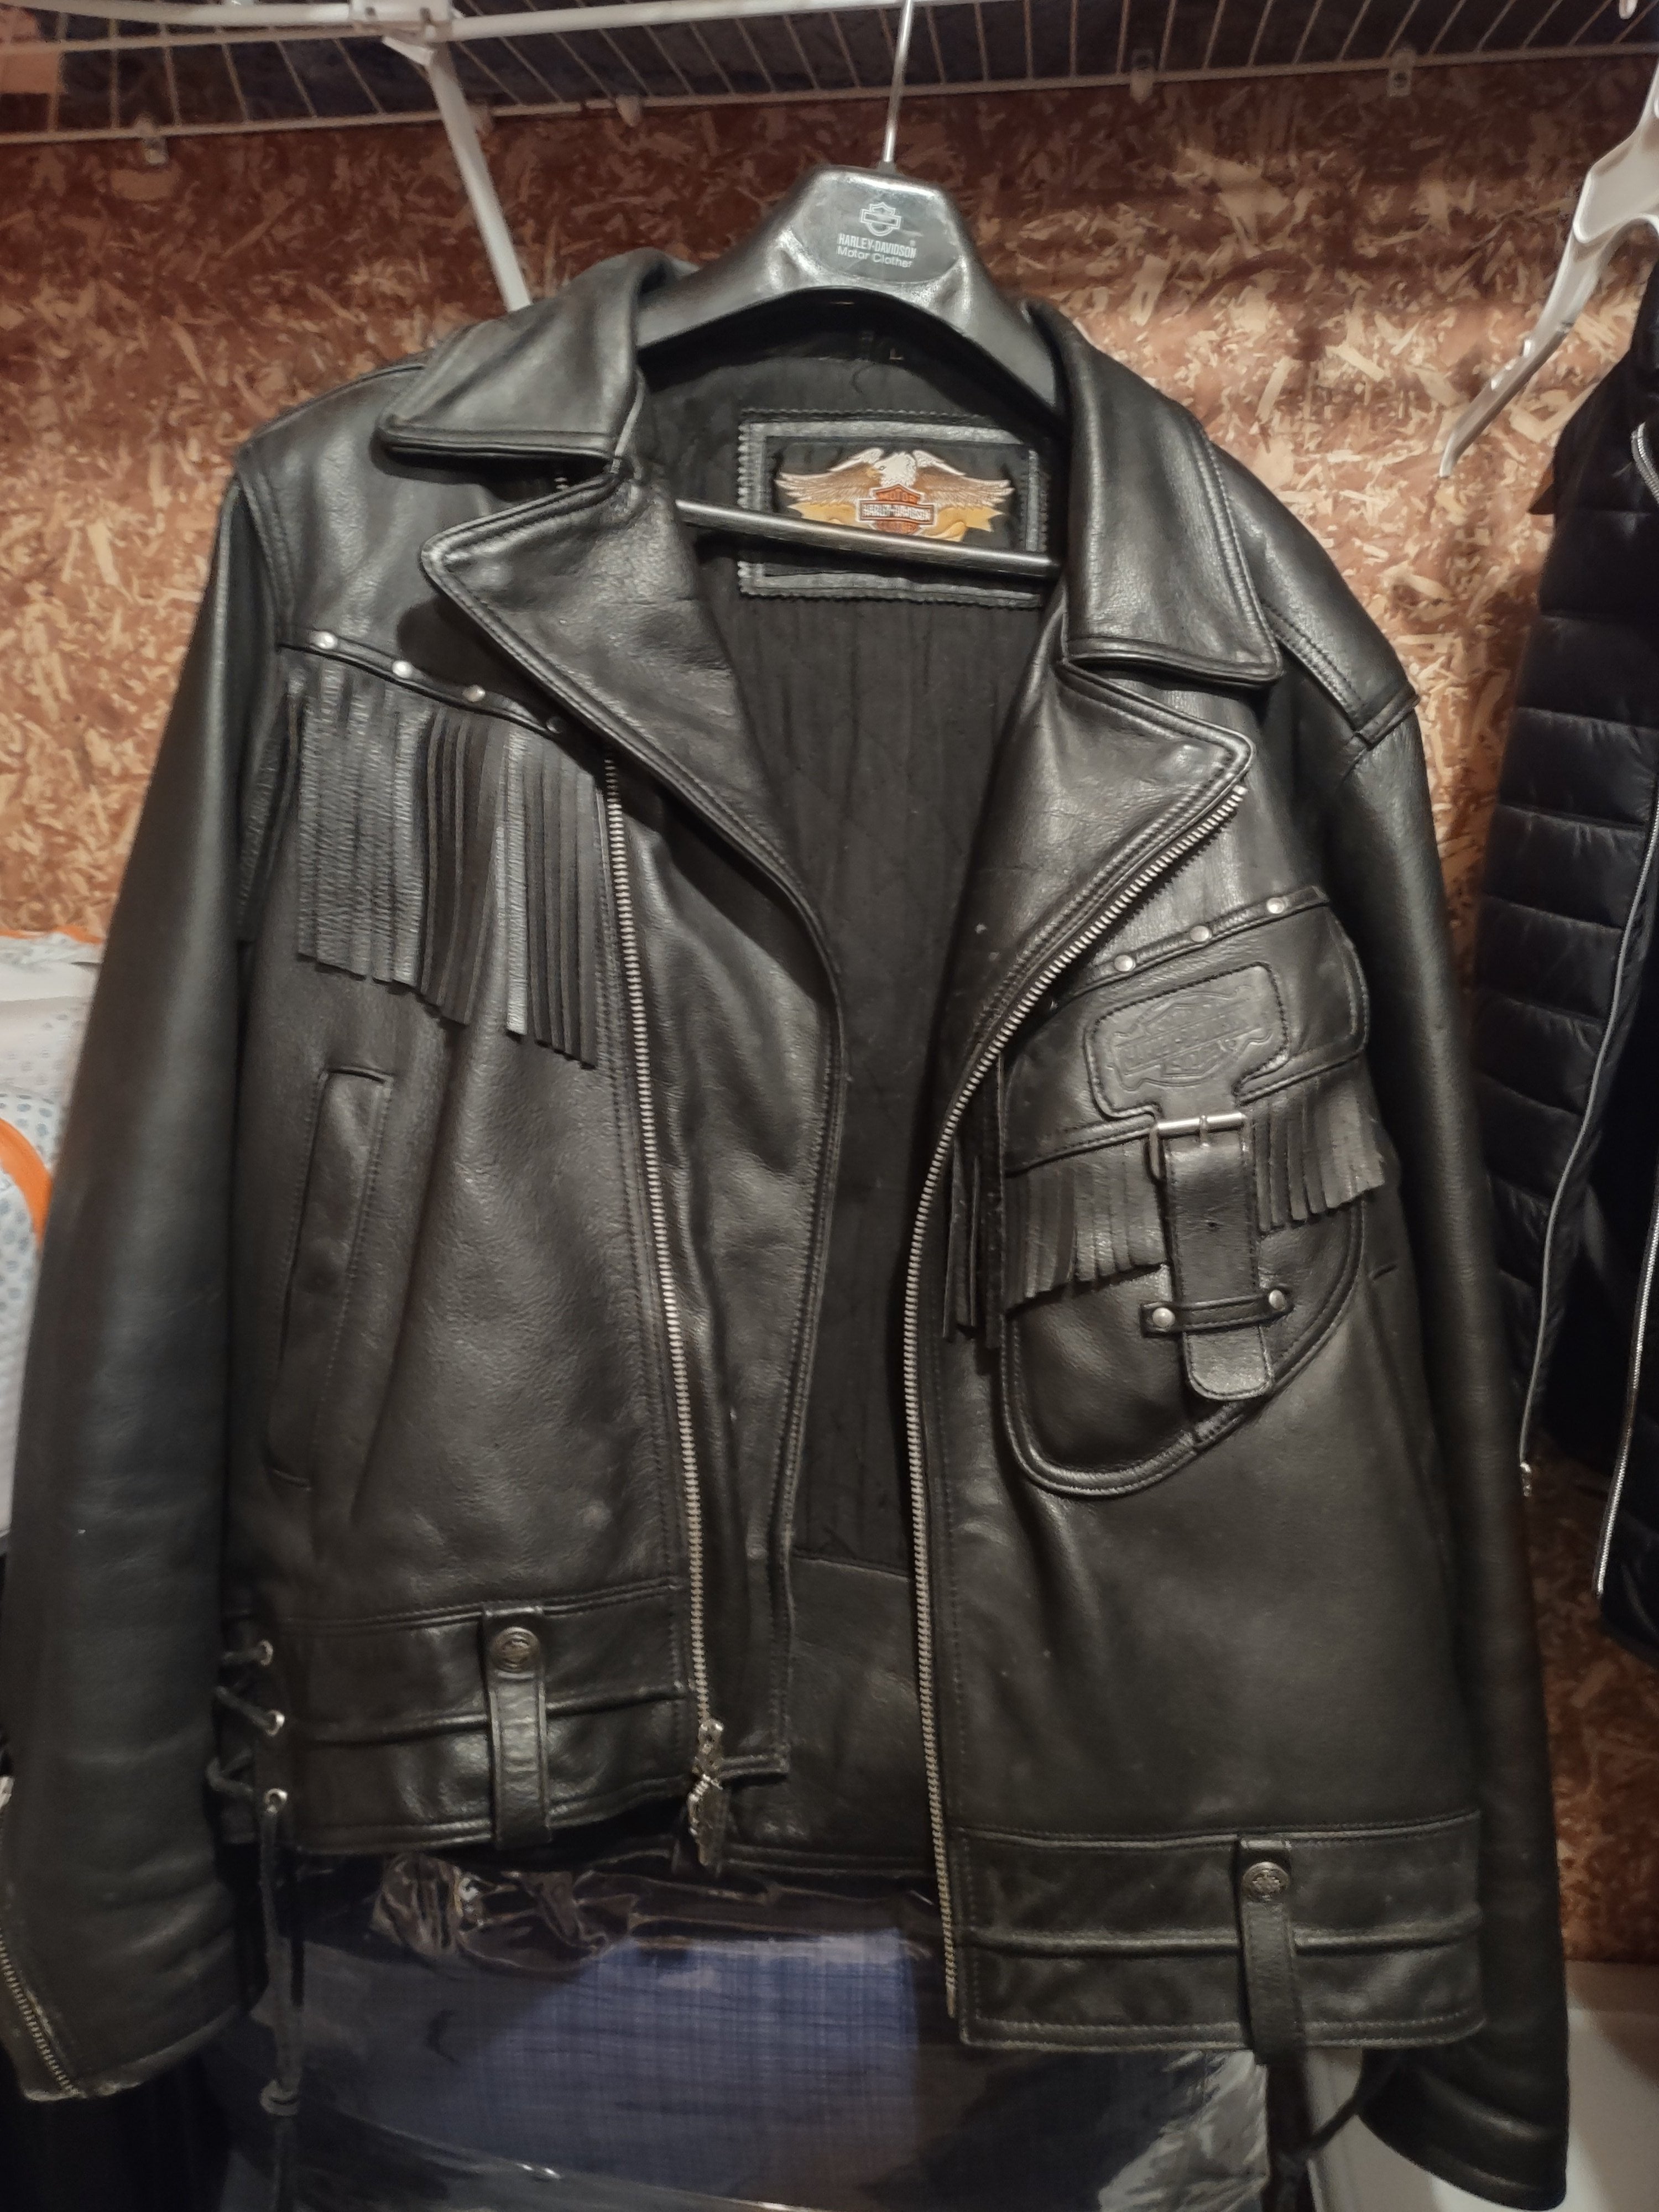 Trying to identify the year of my Harley-Davidson jacket